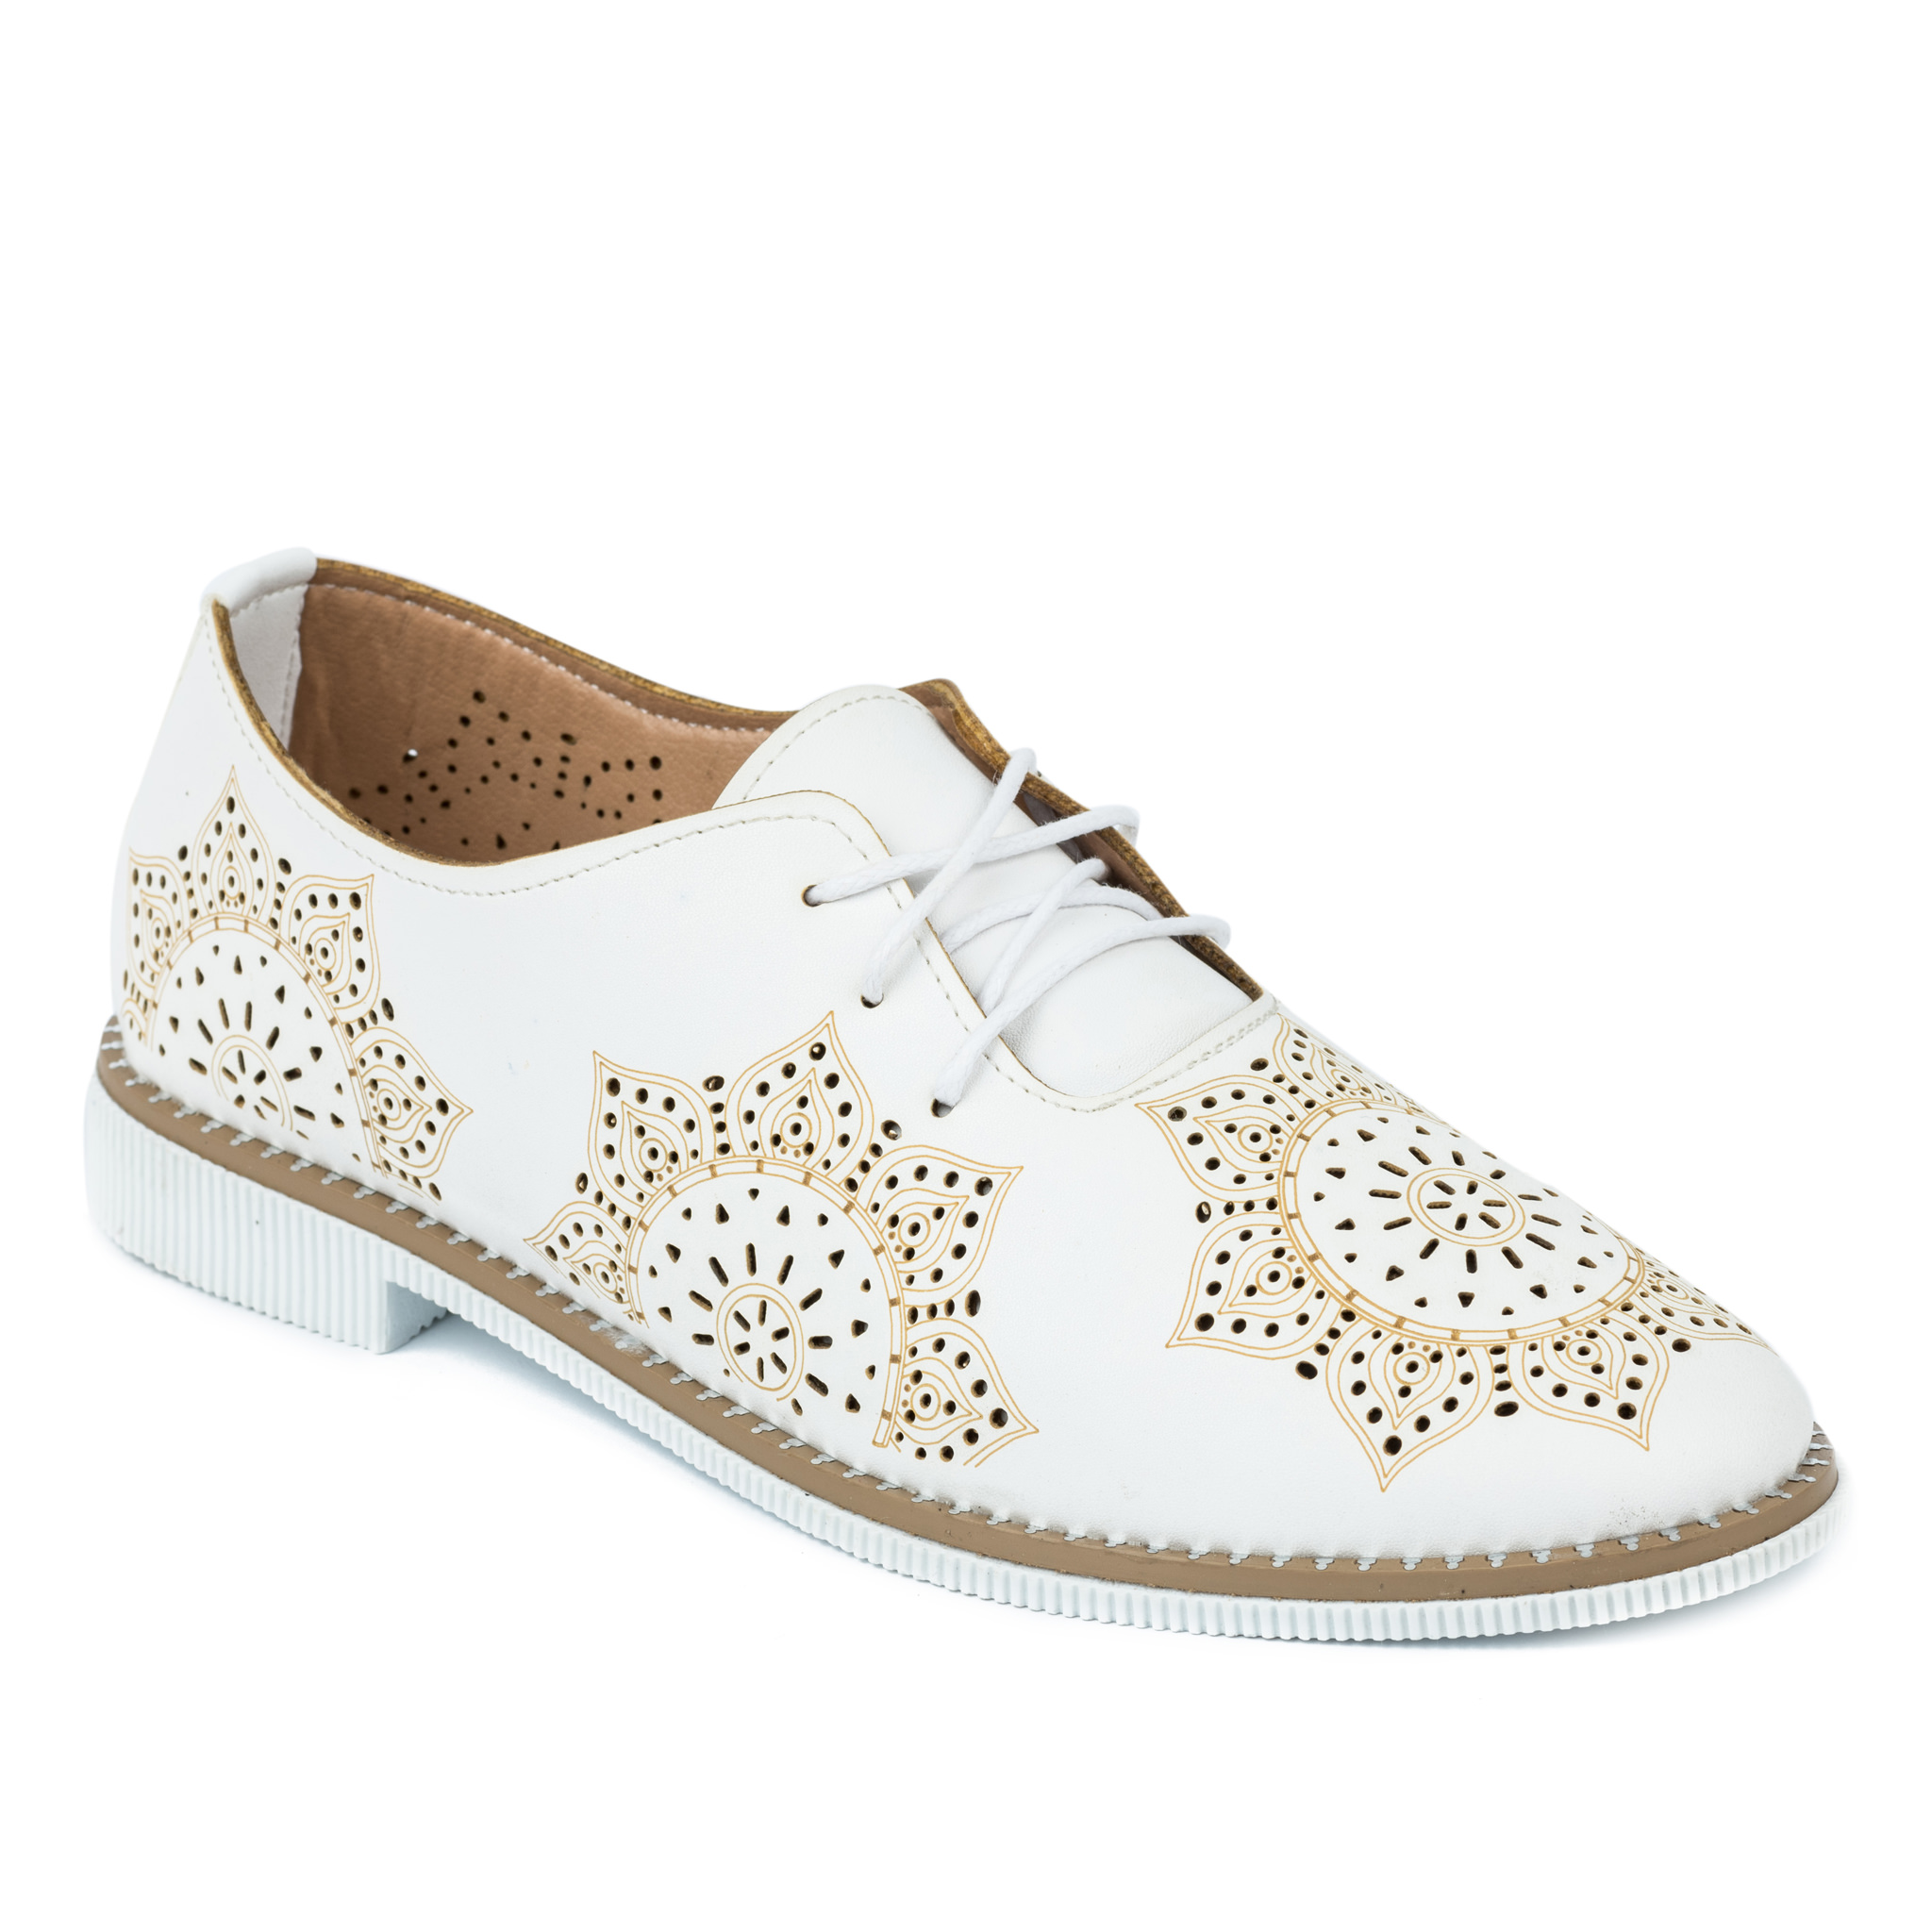 HOLLOW OXFORD SHOES - WHITE